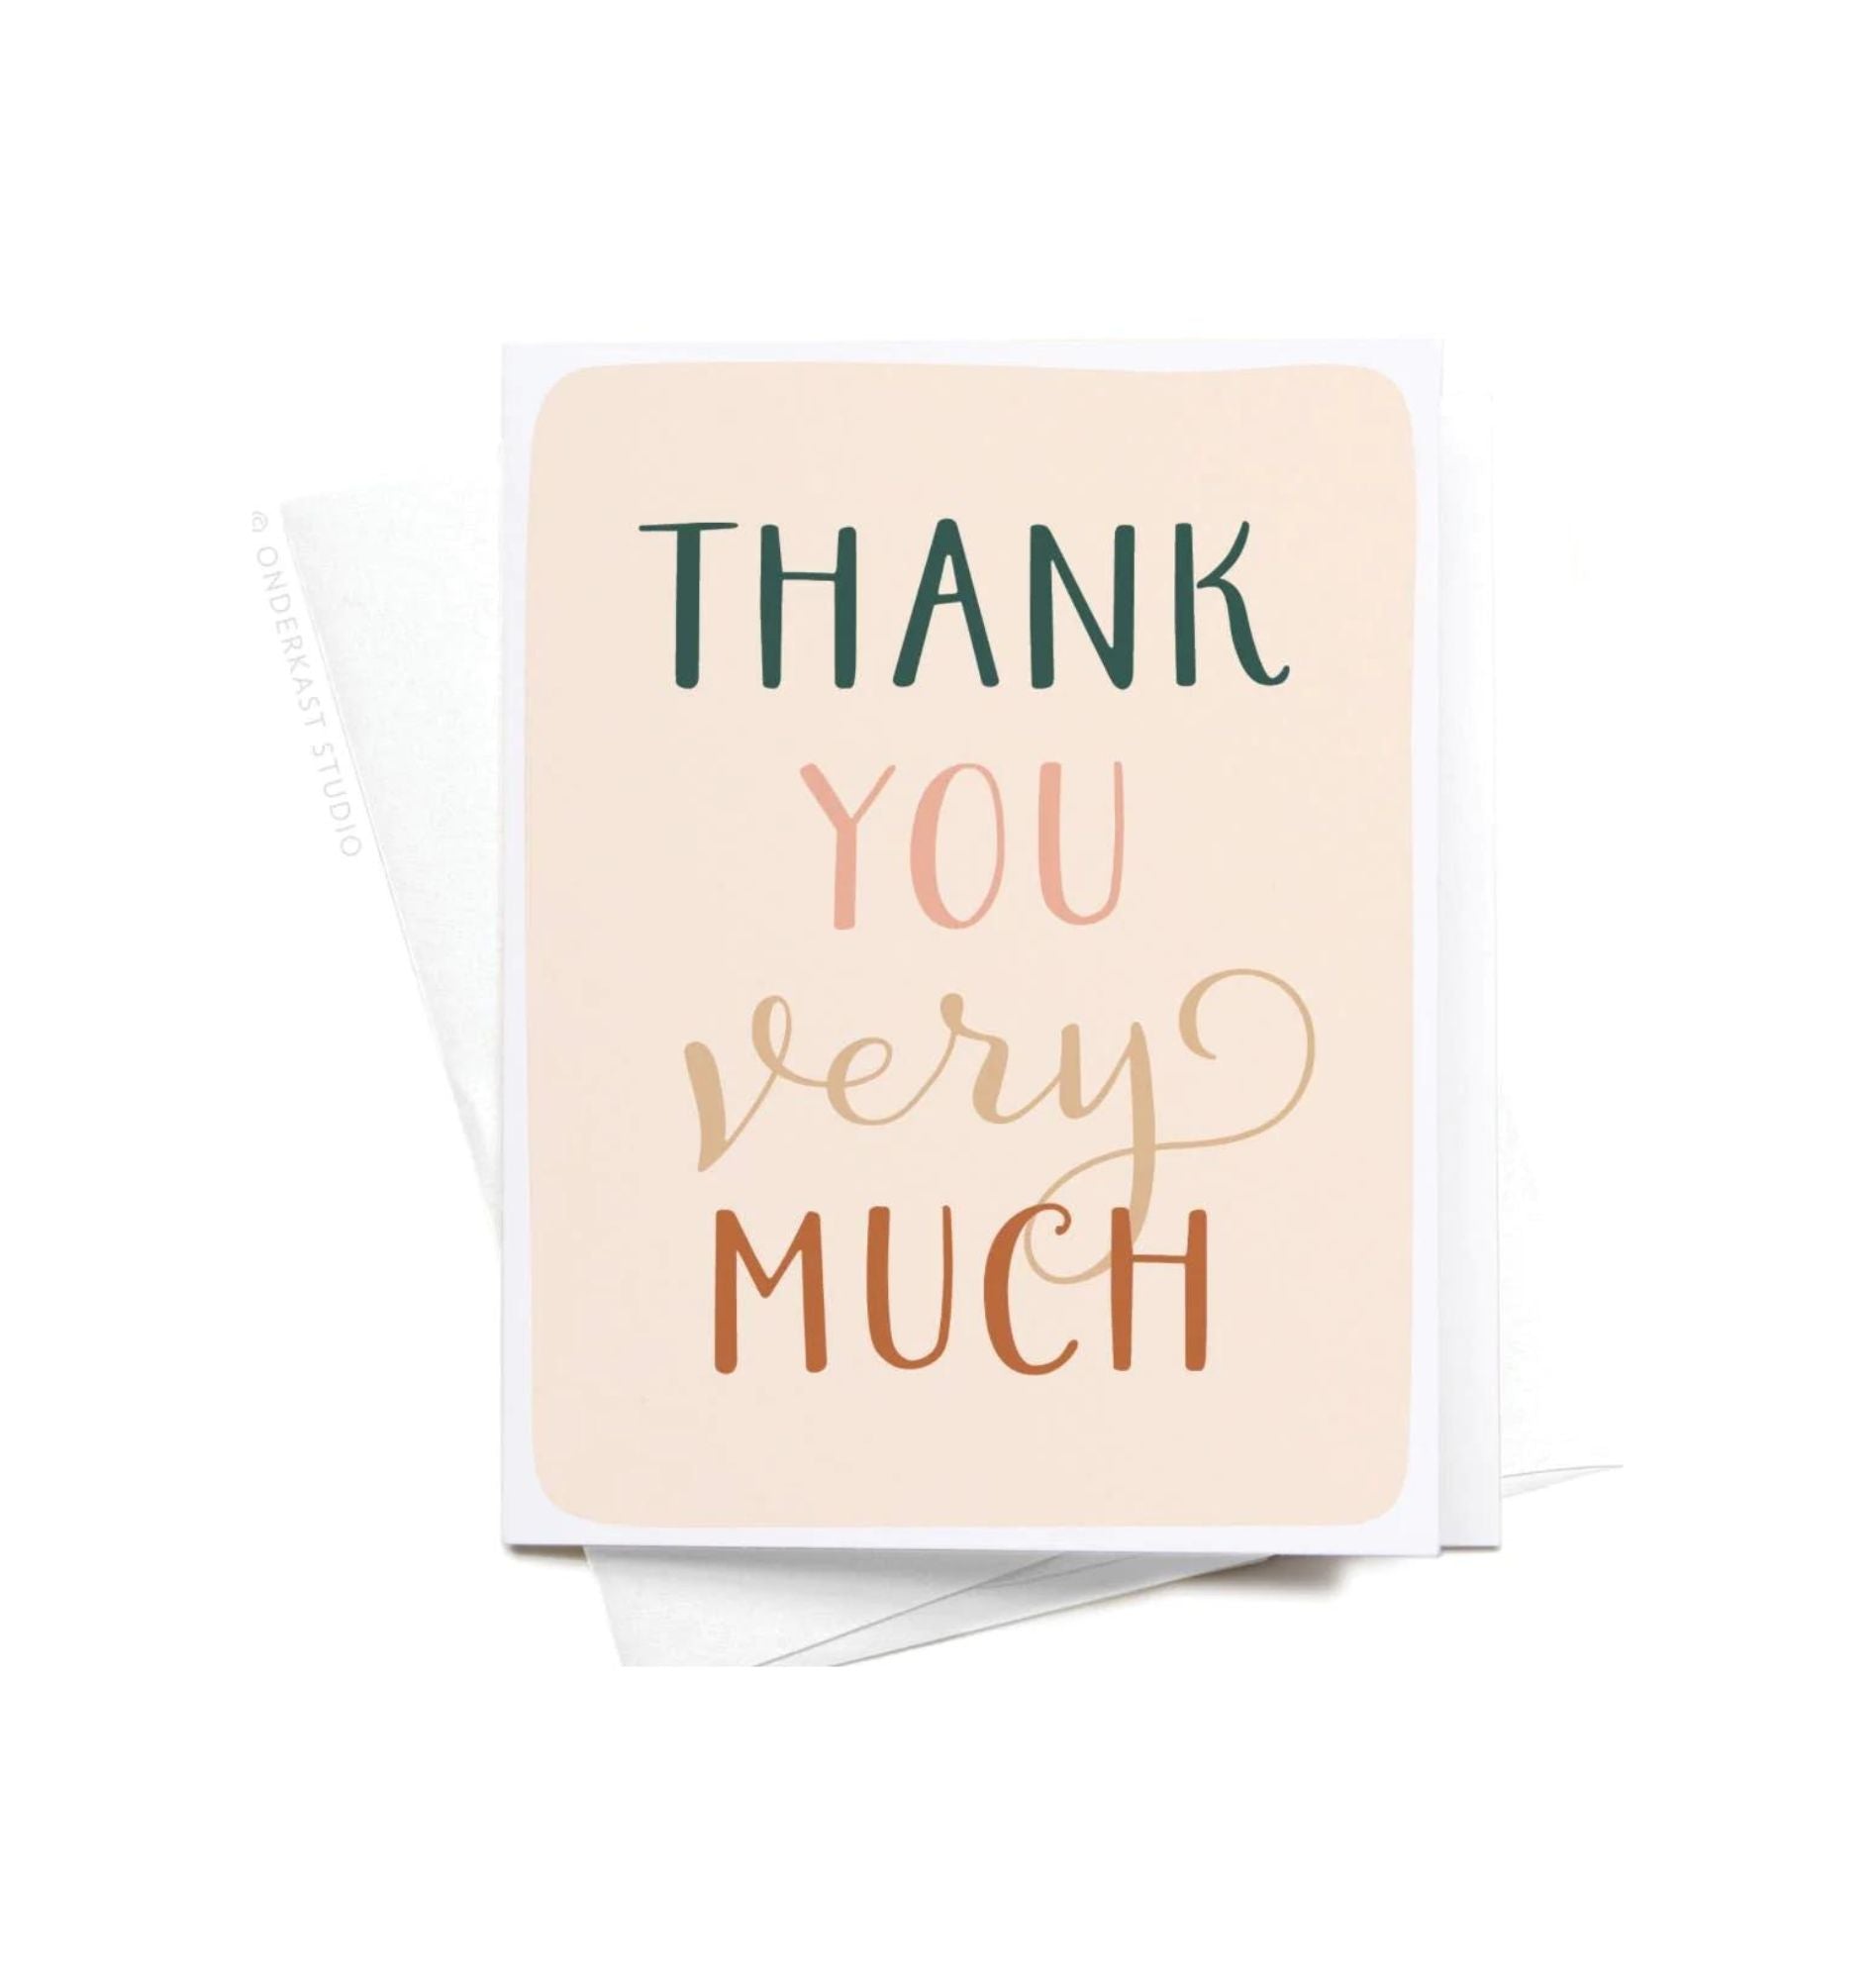 Thank You Very Much Greeting Card